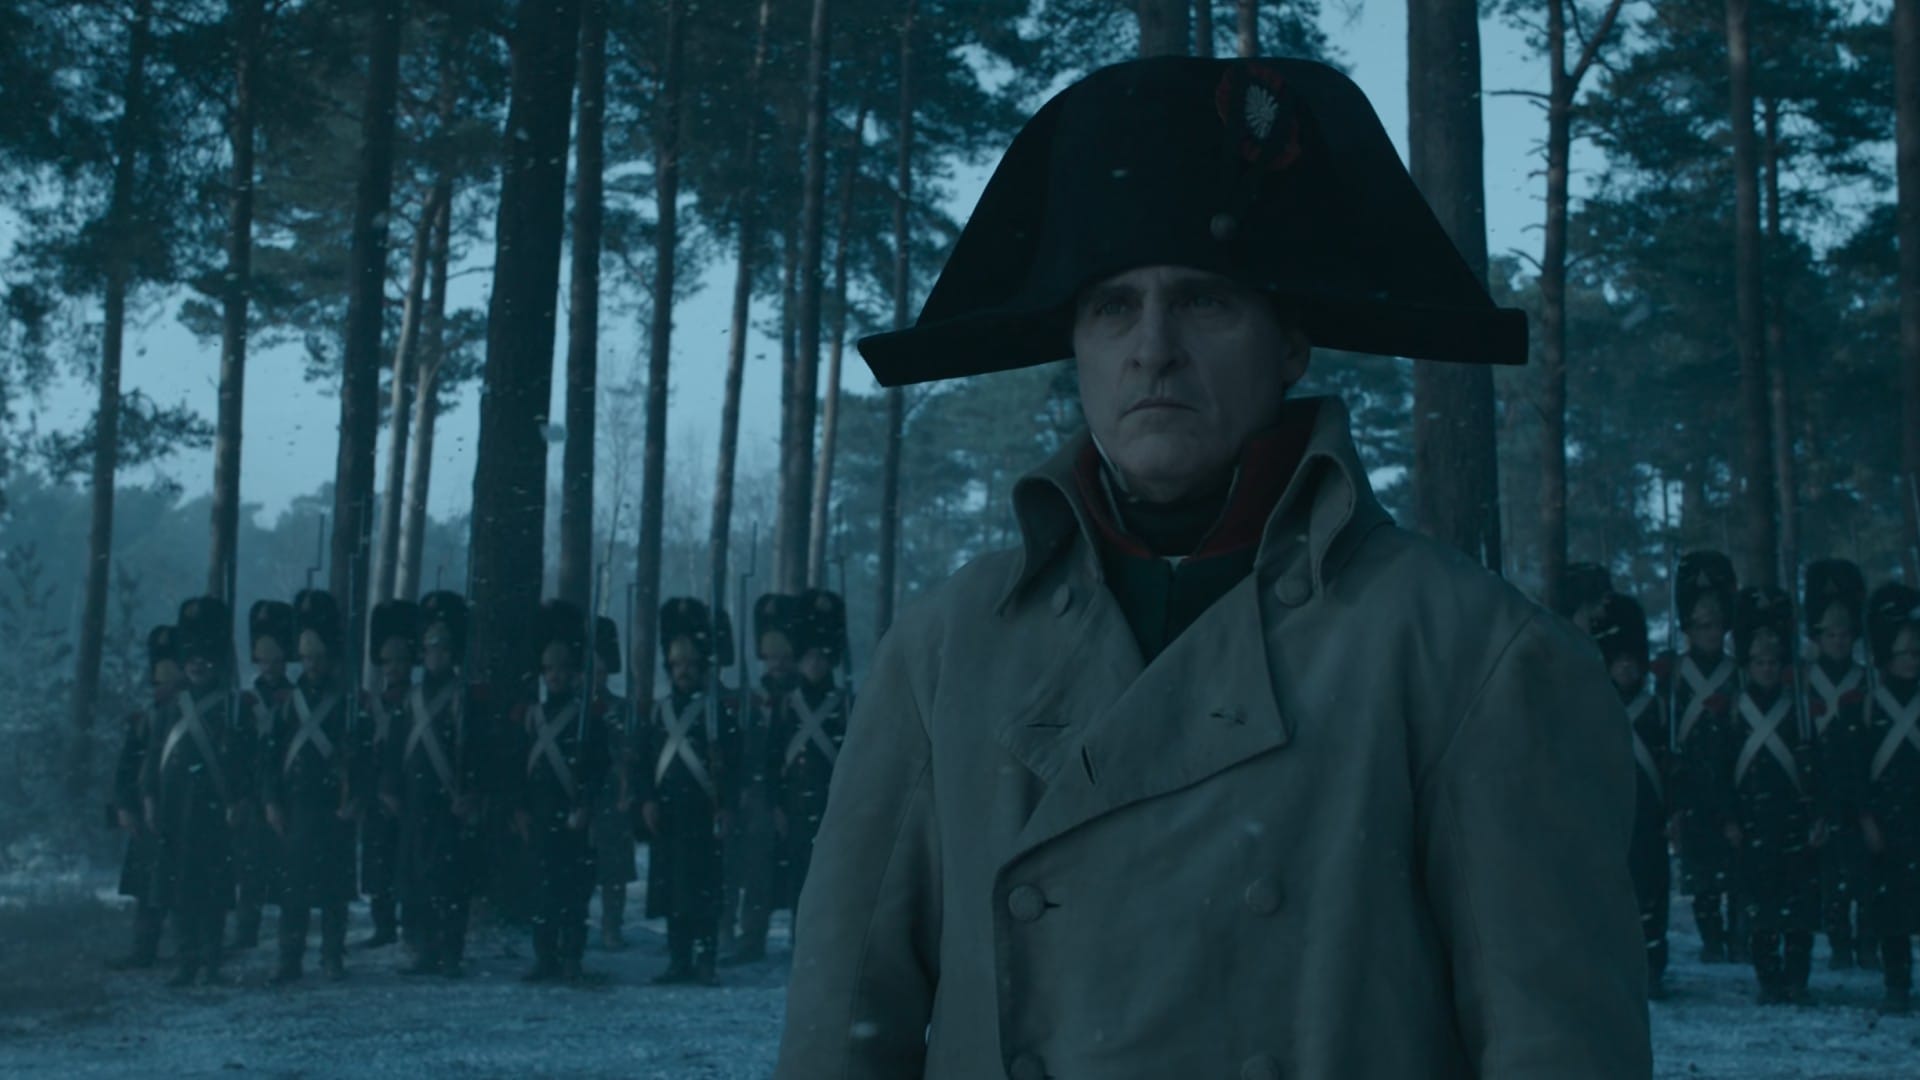 Why The Battle of Austerlitz from Ridley Scott's Napoleon is a Cinematic Masterpiece?